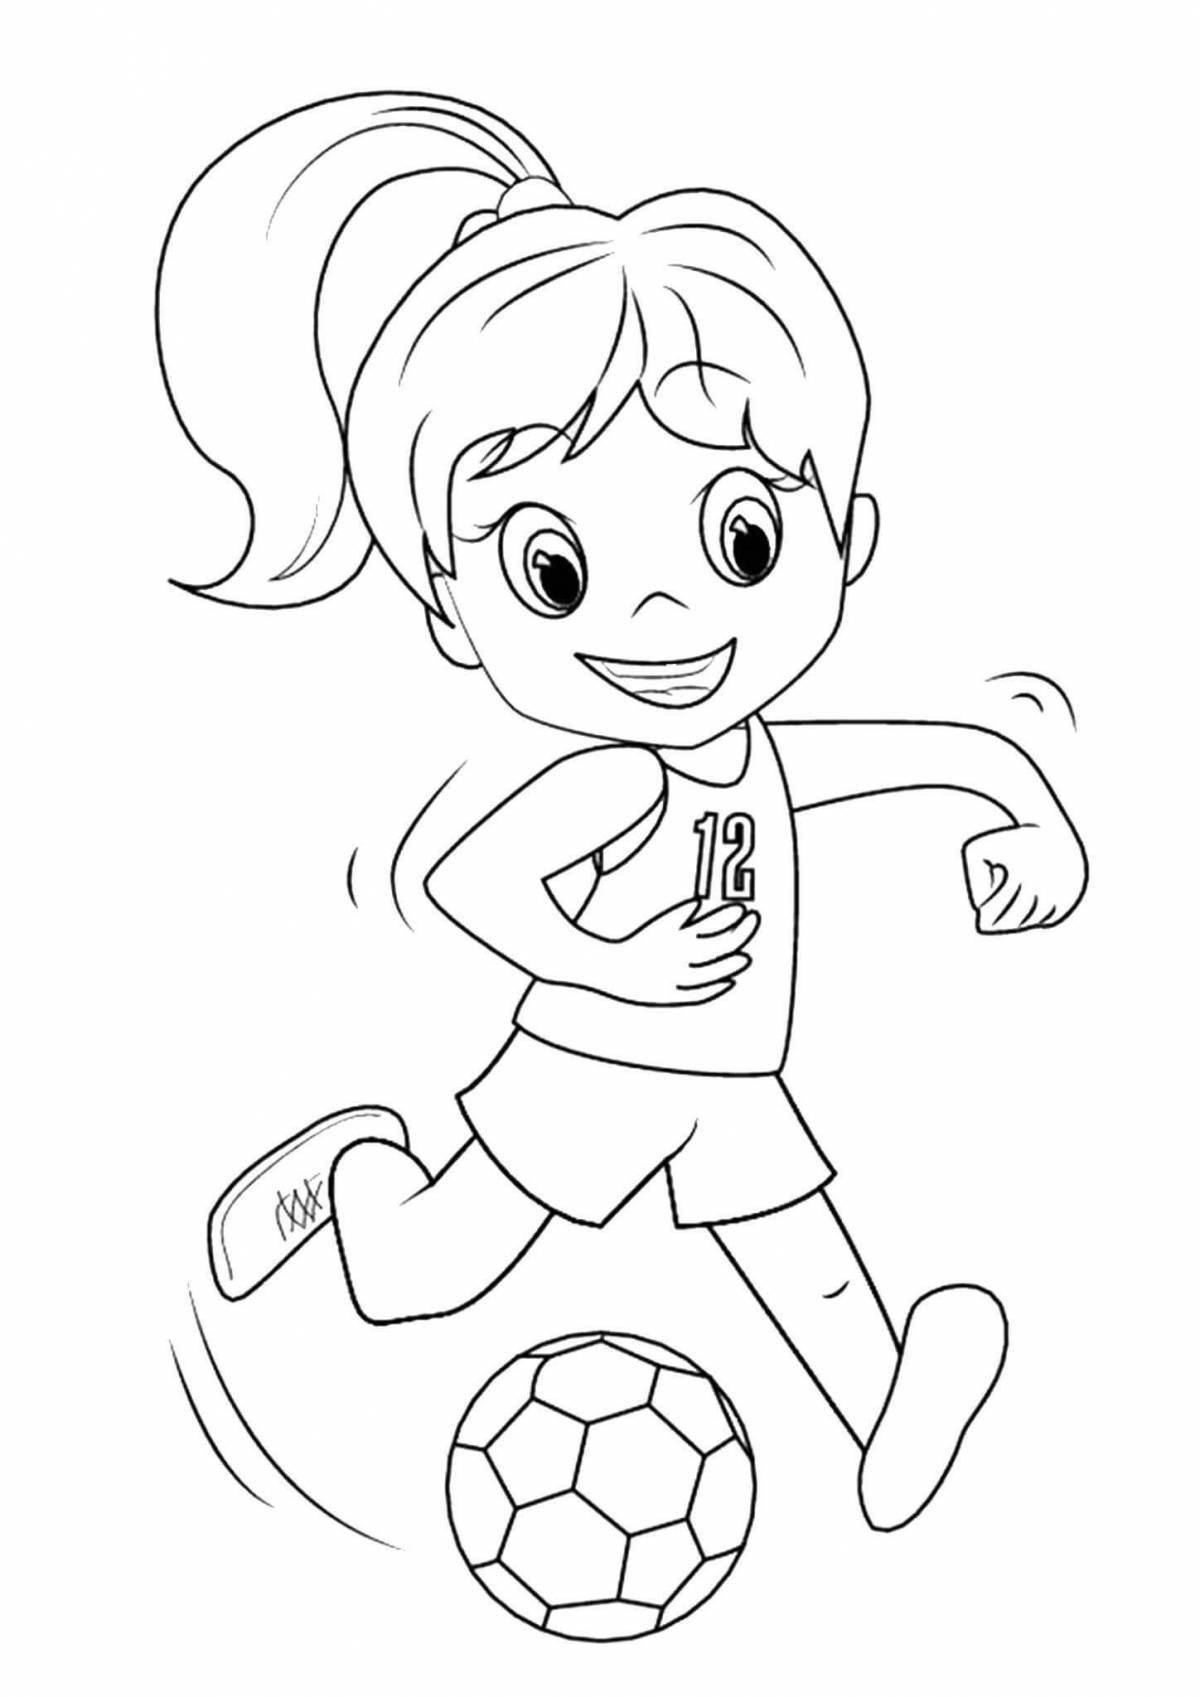 Fabulous sports coloring pages for preschoolers